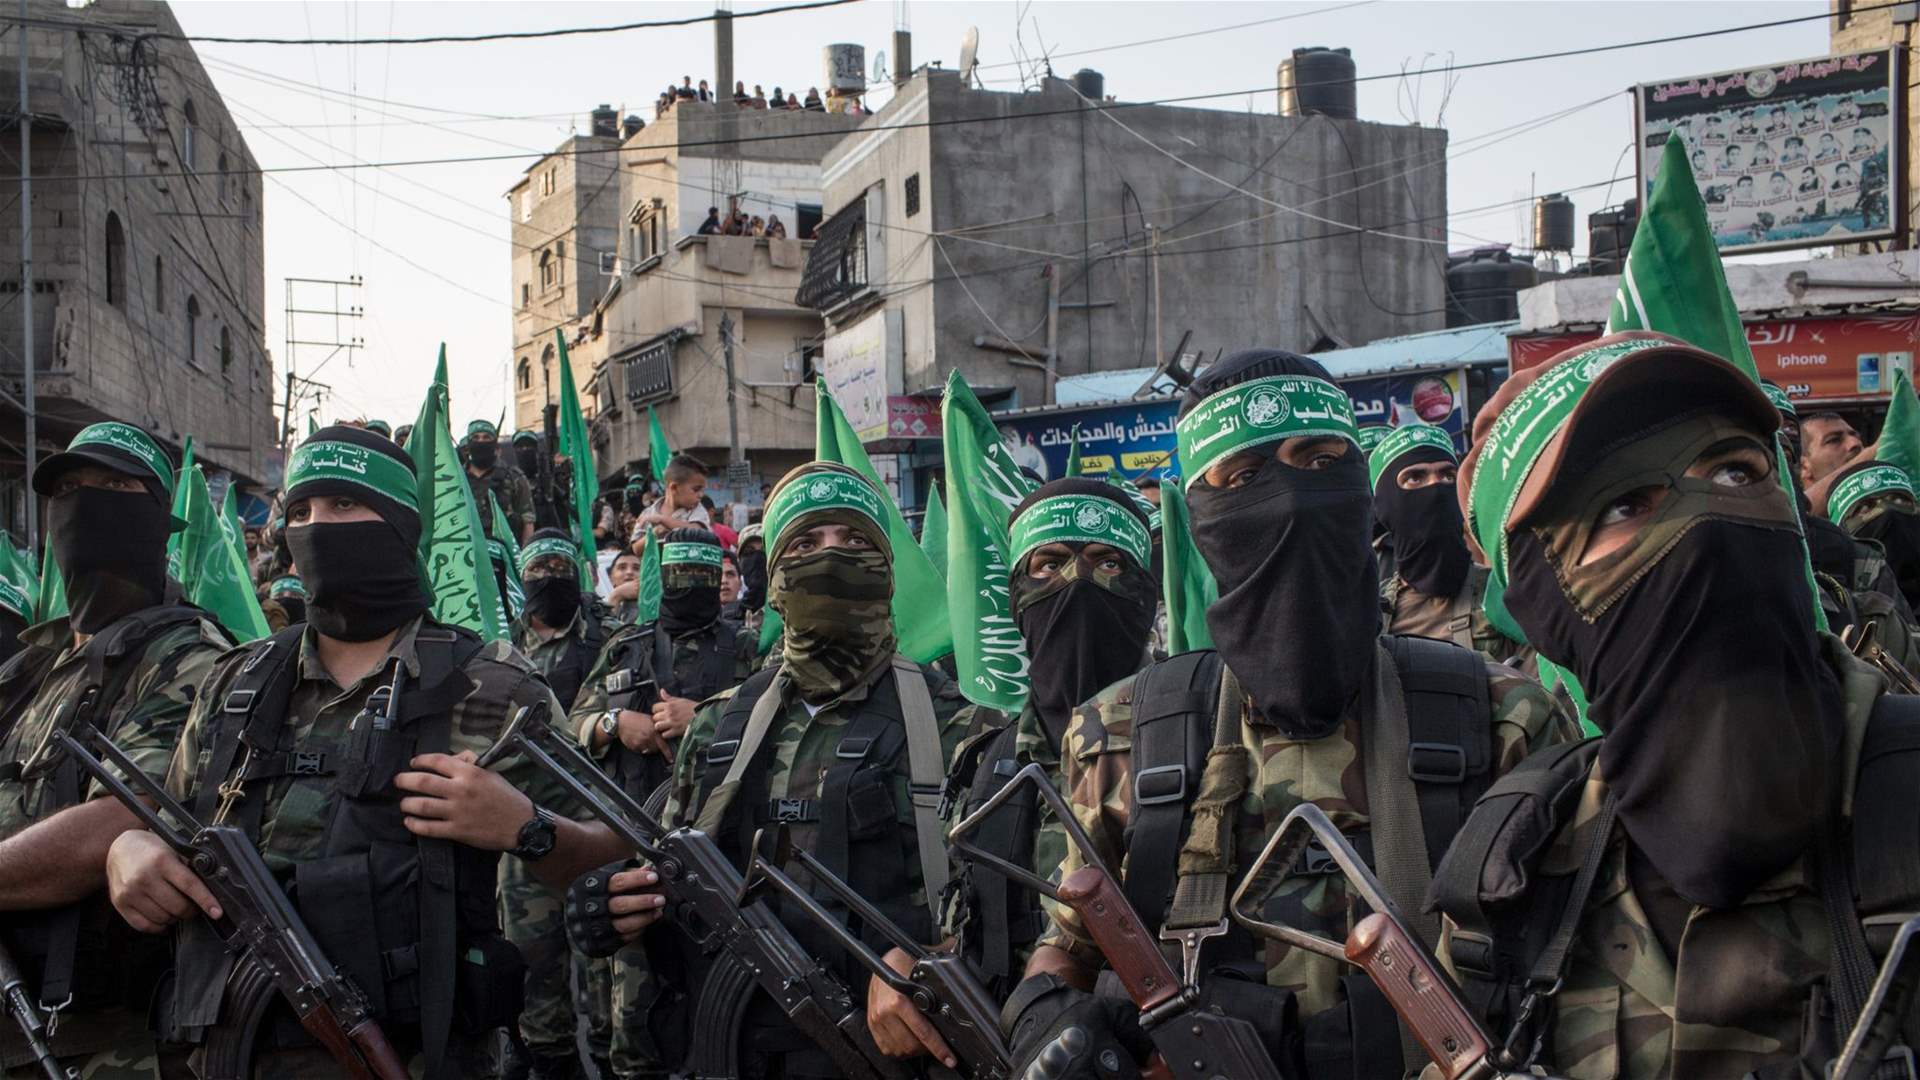 Hamas delegation visits Saudi Arabia amid speculation of a thaw in relations